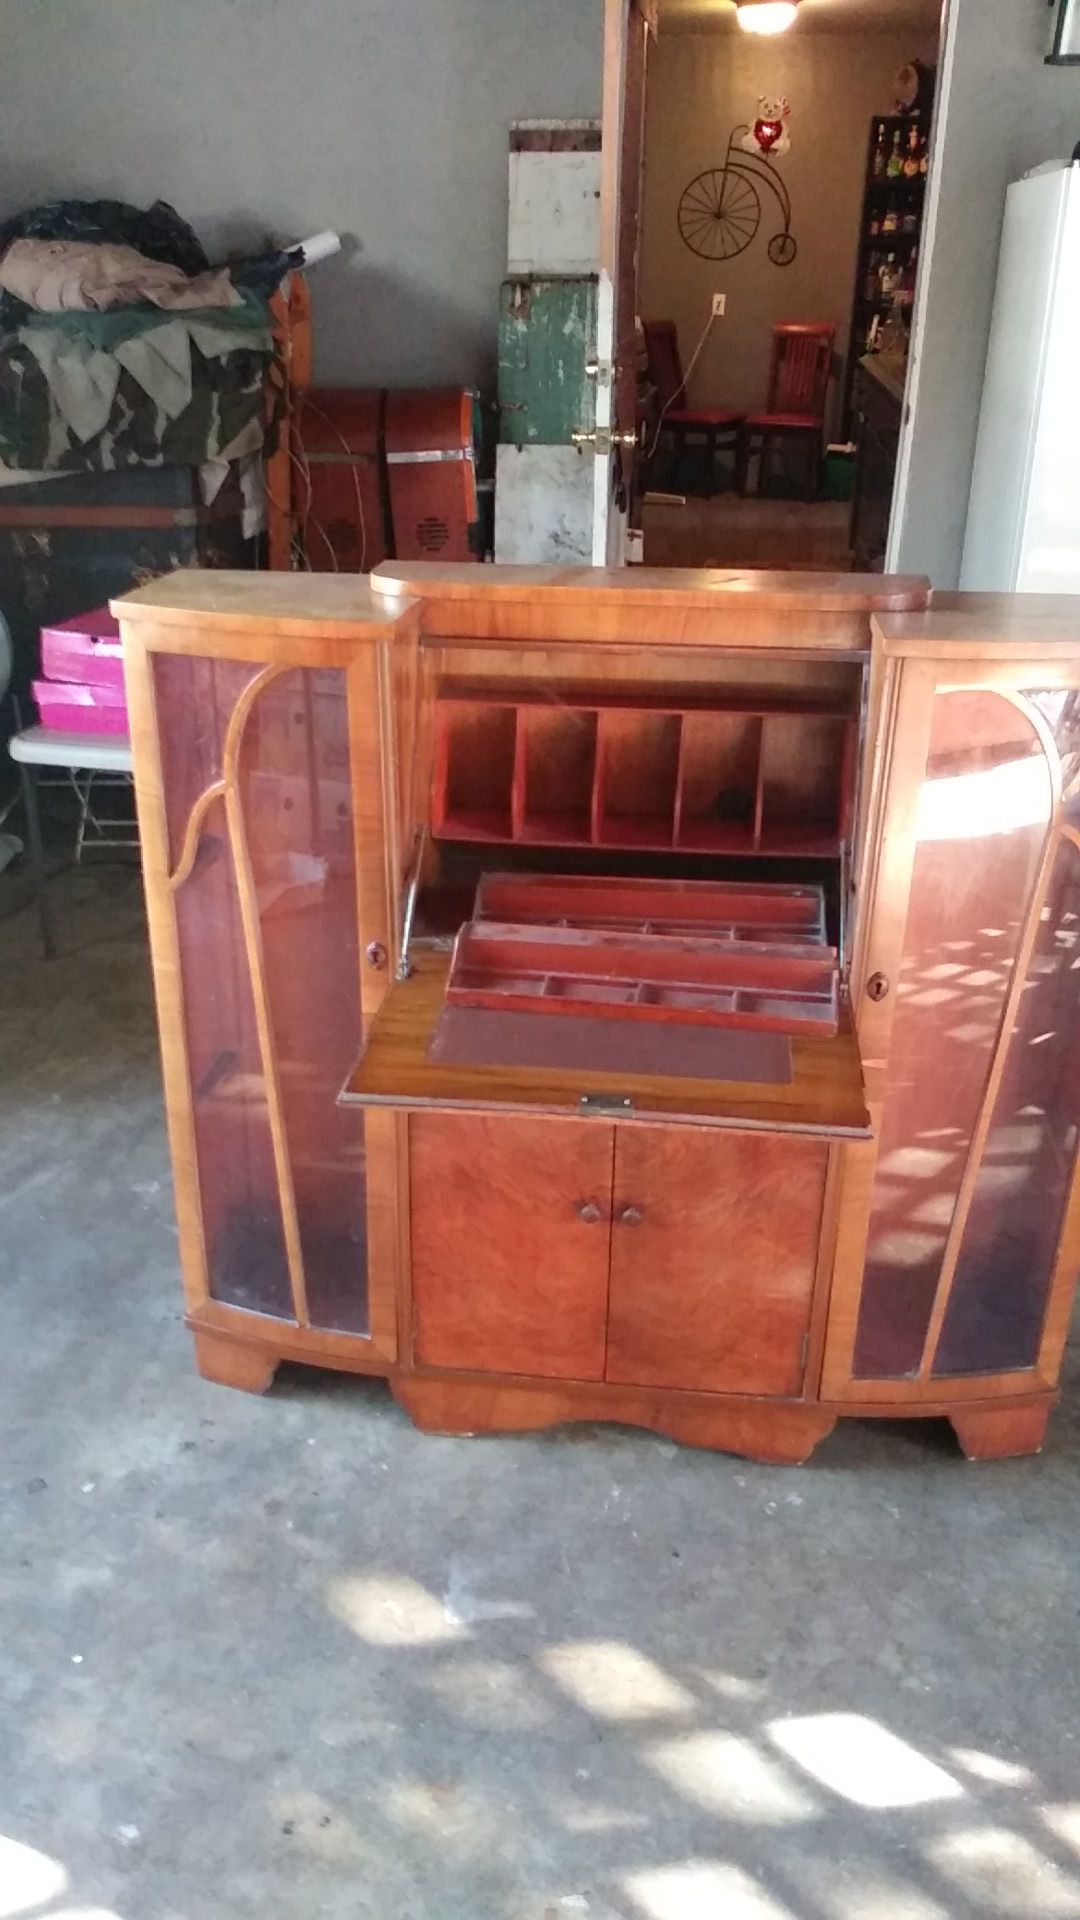 Very beautiful antique cabinet